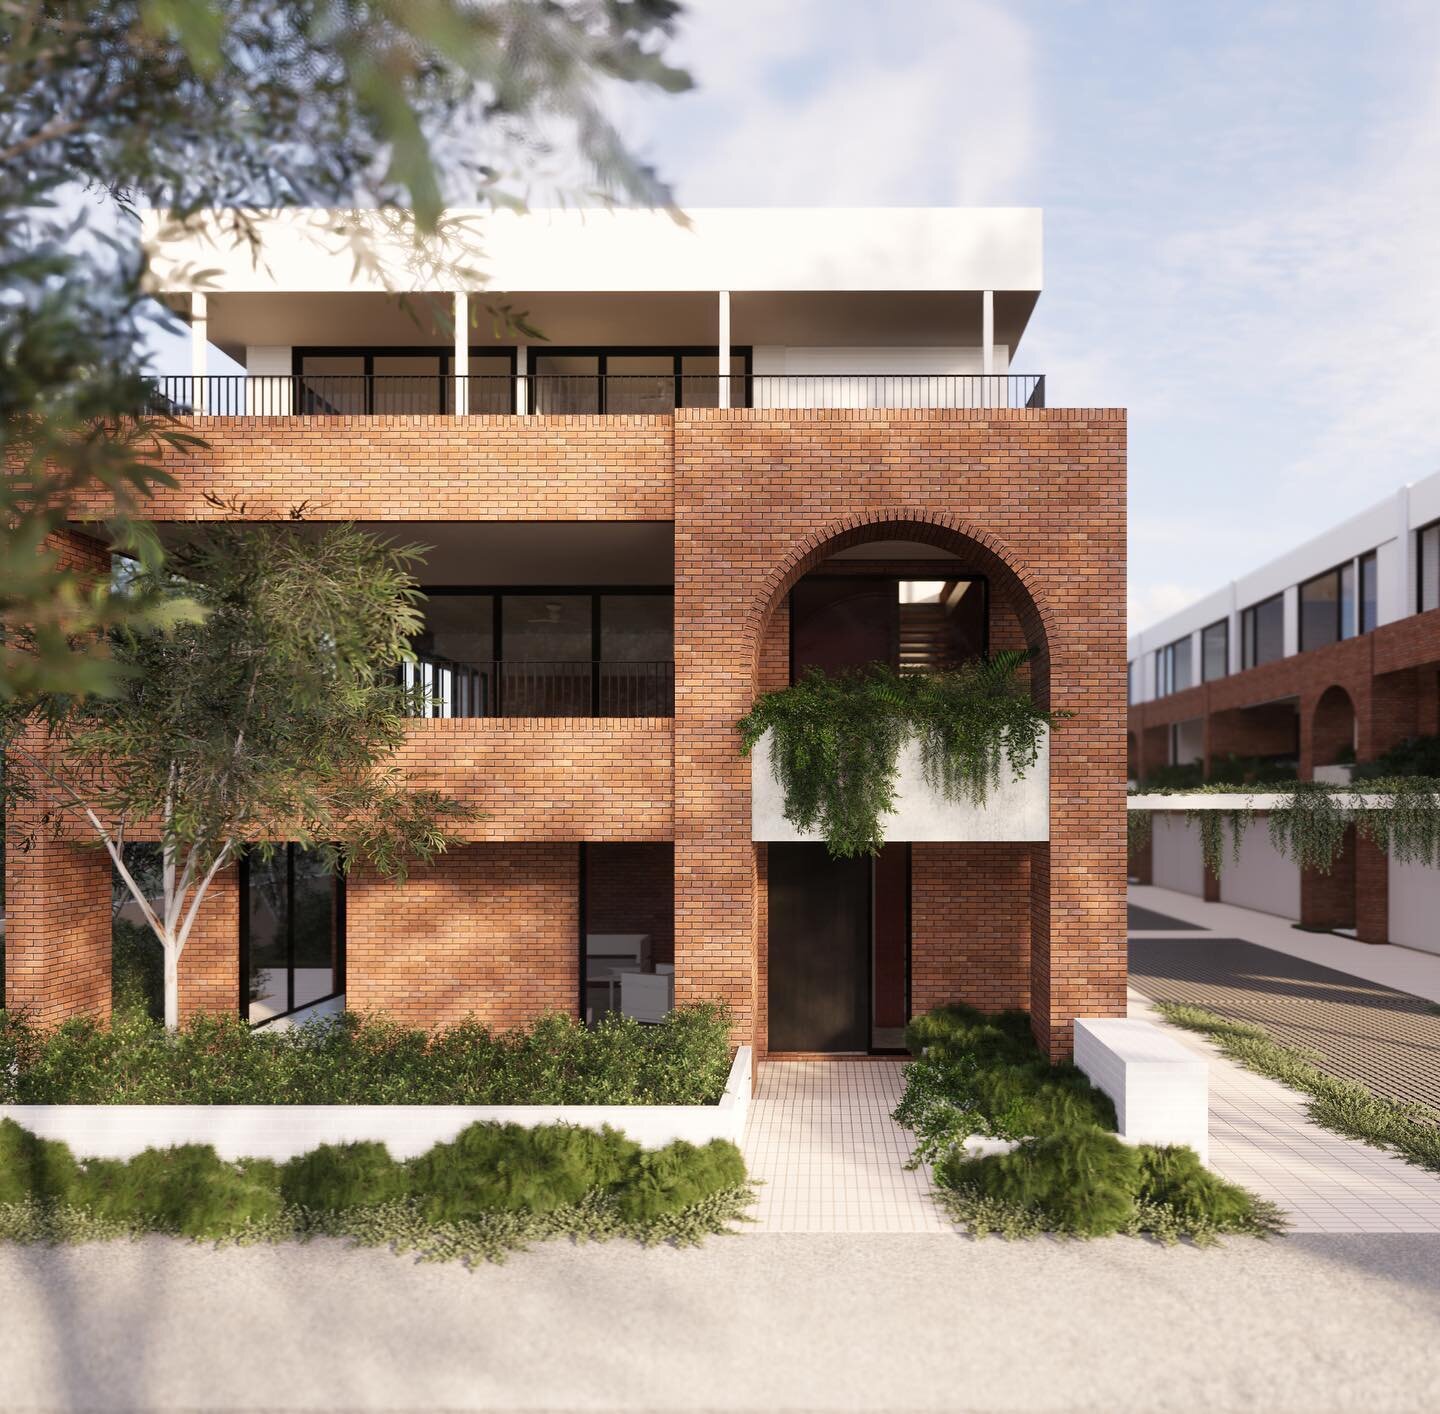 Final details being worked through on #WSLockhart our terrace housing project with landscape partners @capa_studio. Lockhart Lane is a new laneway development off a quiet street in Como. Each of the 10 terraces is fronted by red brick arches, second 